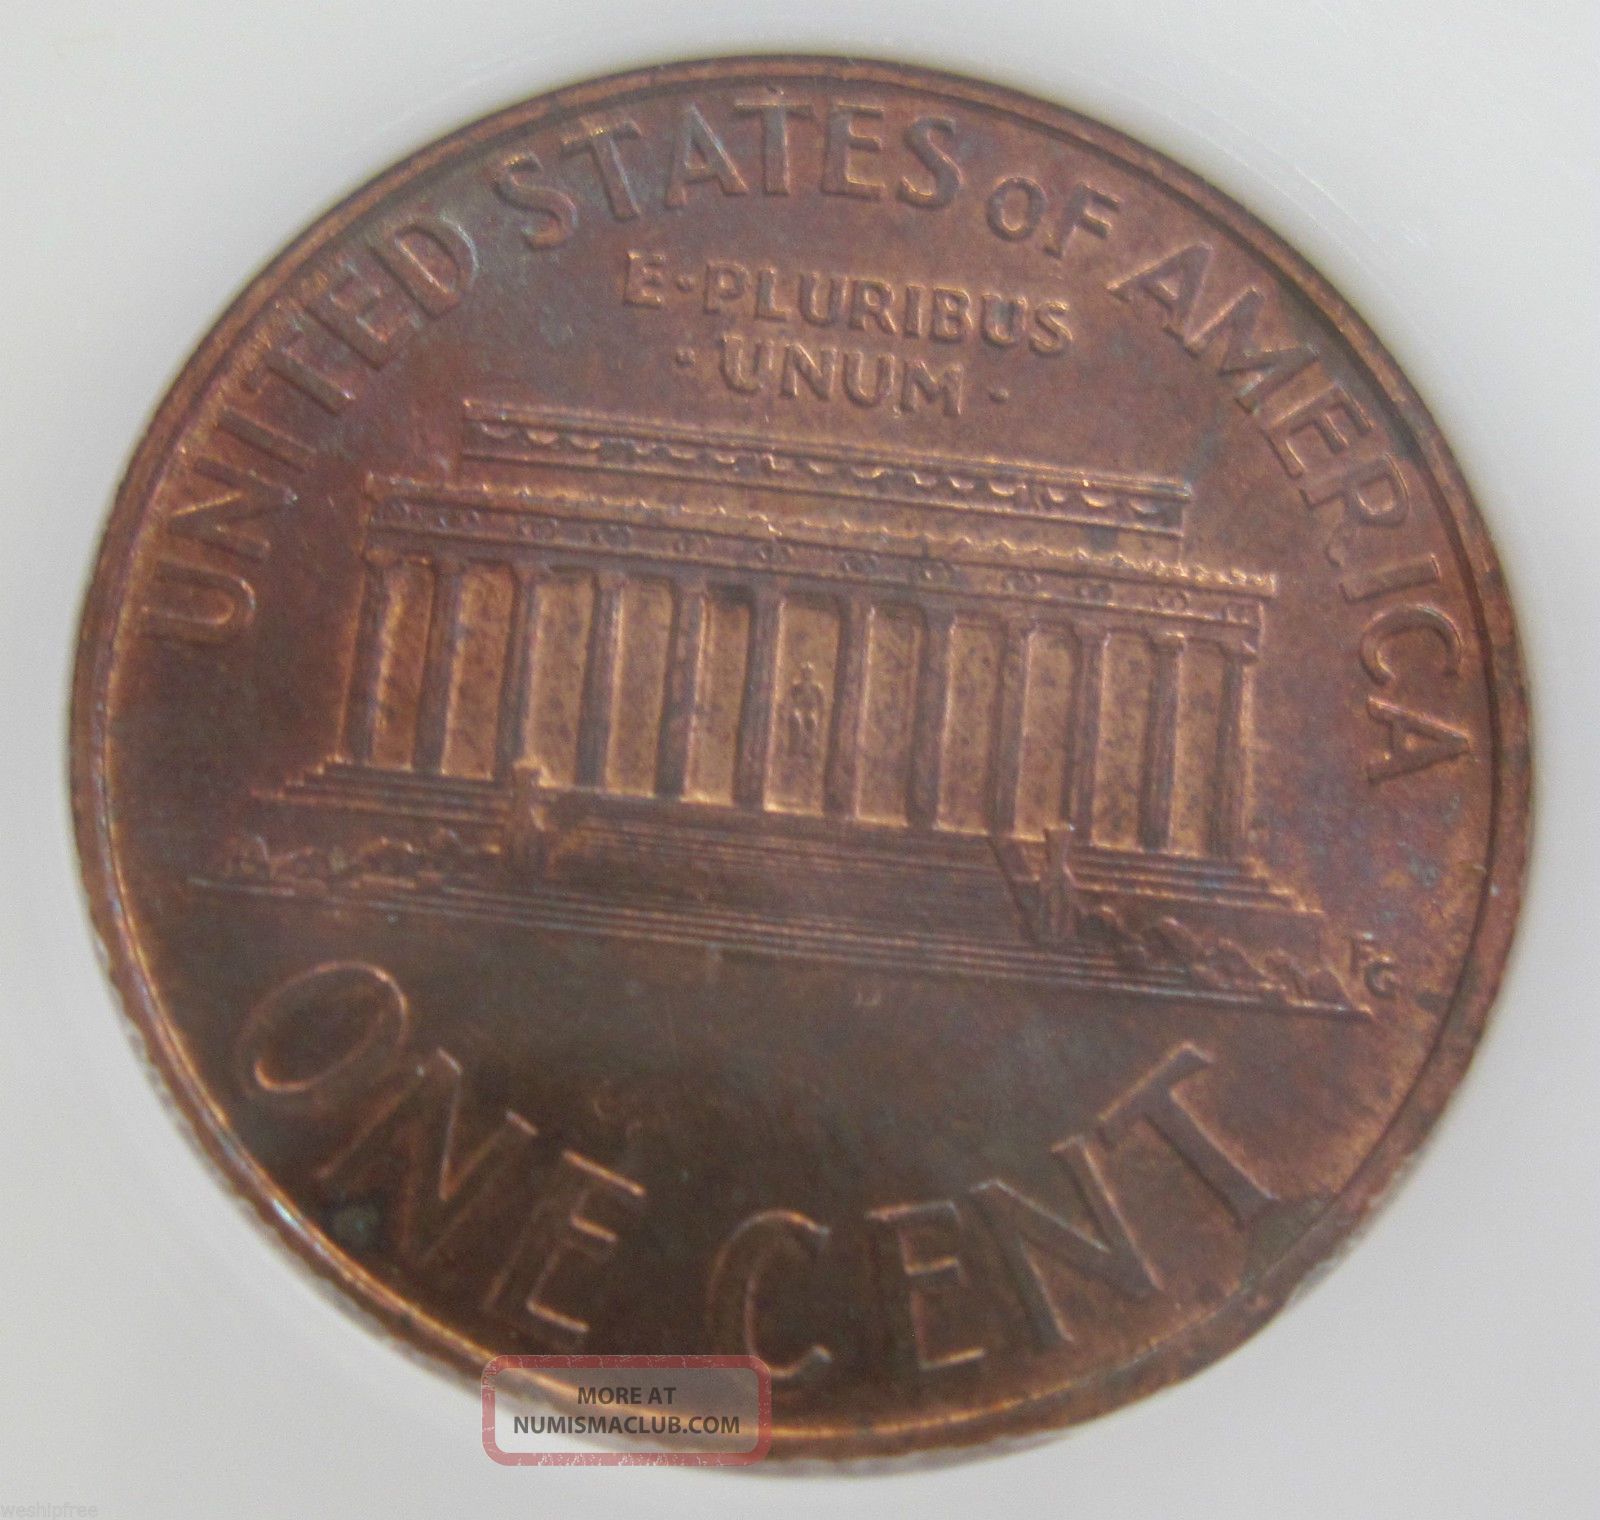 1995 Lincoln Memorial Cent Doubled Die Obverse (1125c)